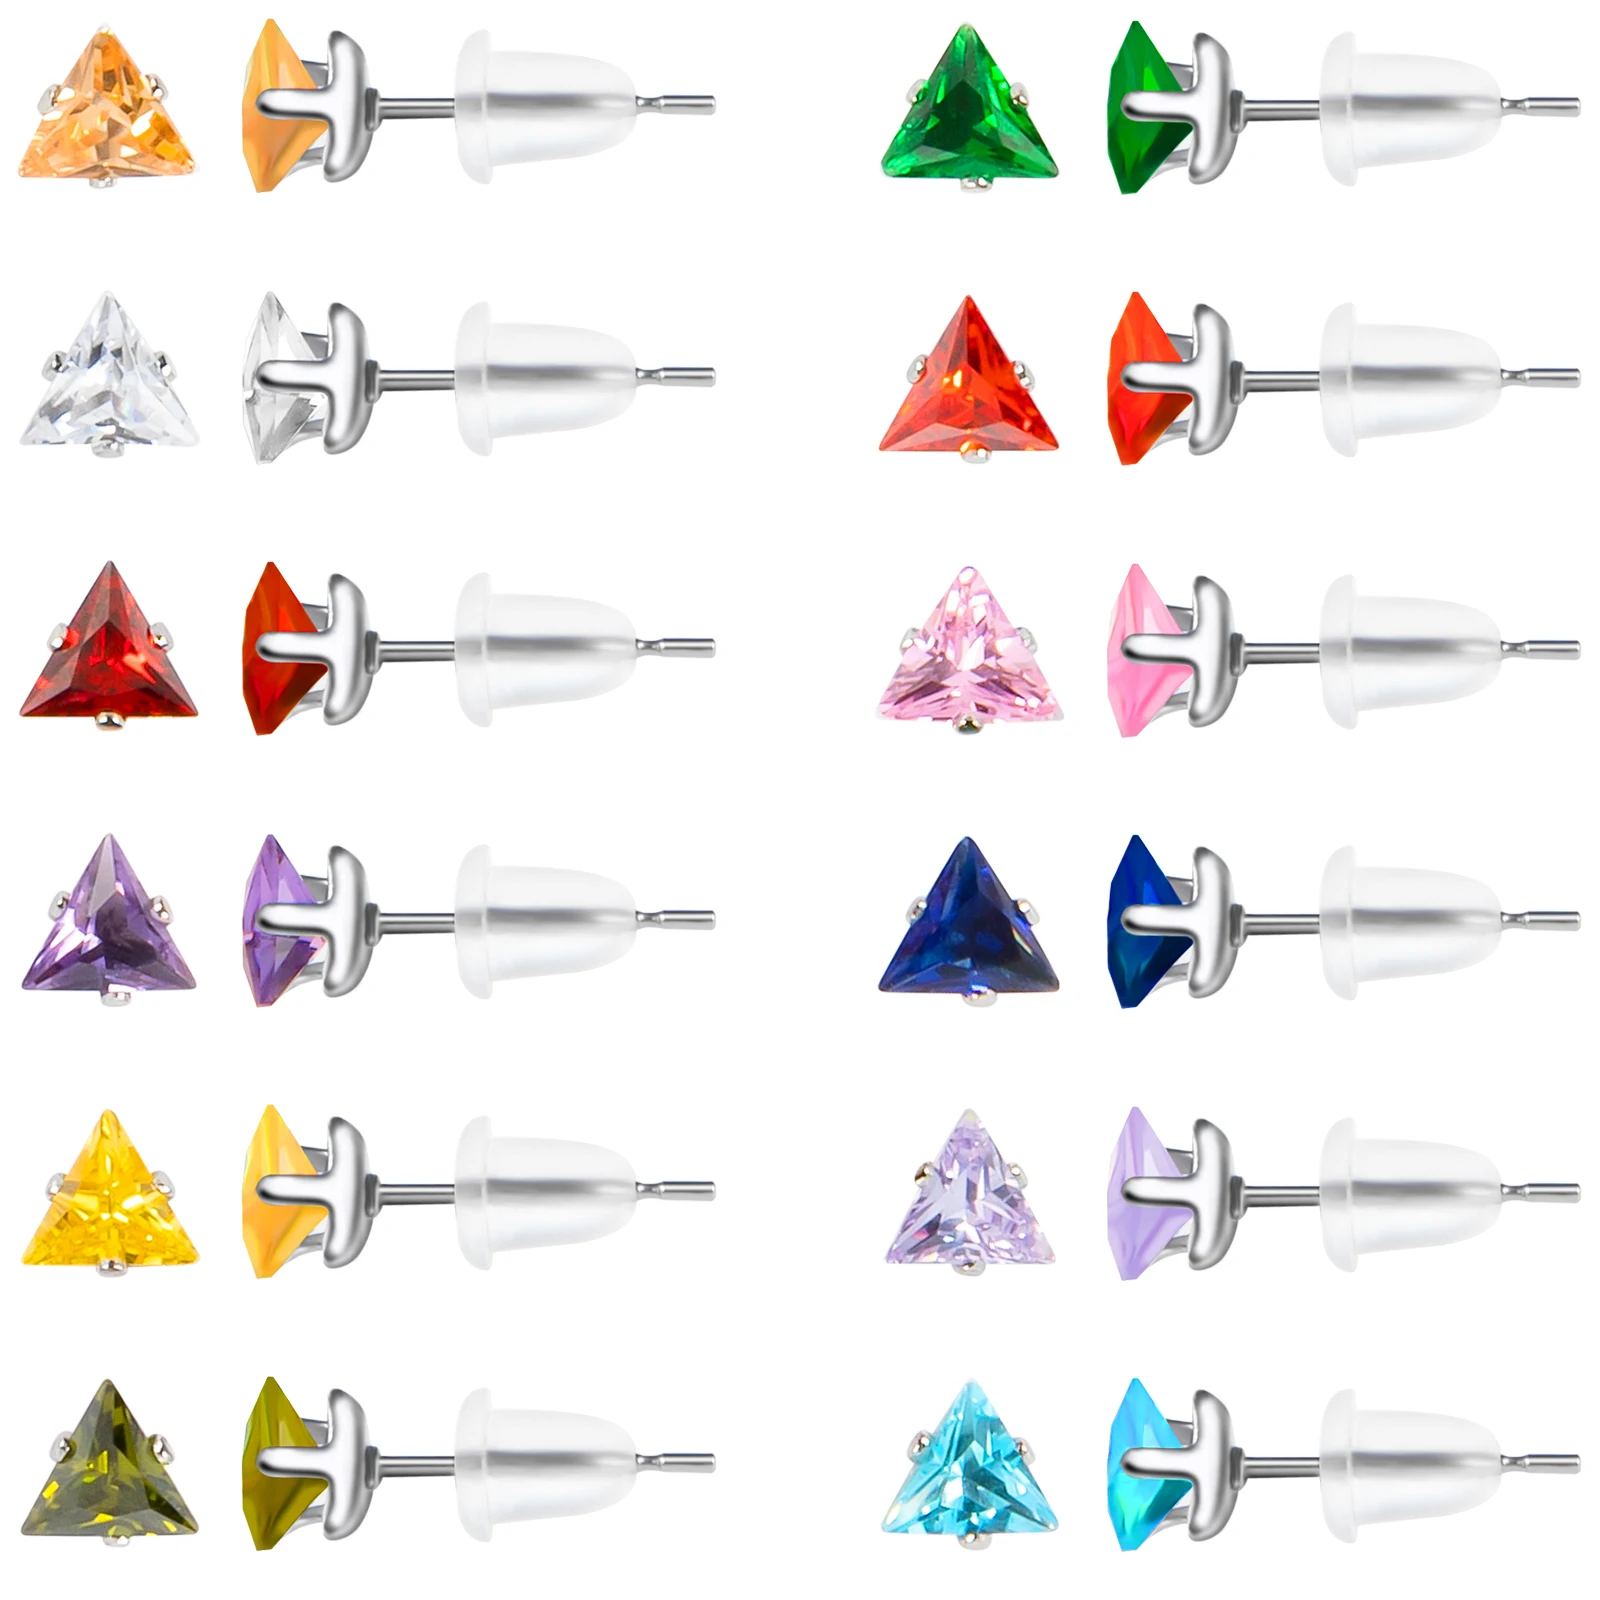 12 Pairs 316L Stainless Steel Triangle Stud Earrings,Birthstone CZ Surgical Steel Earring Sets for Women Girls with Size 3 4 5mm